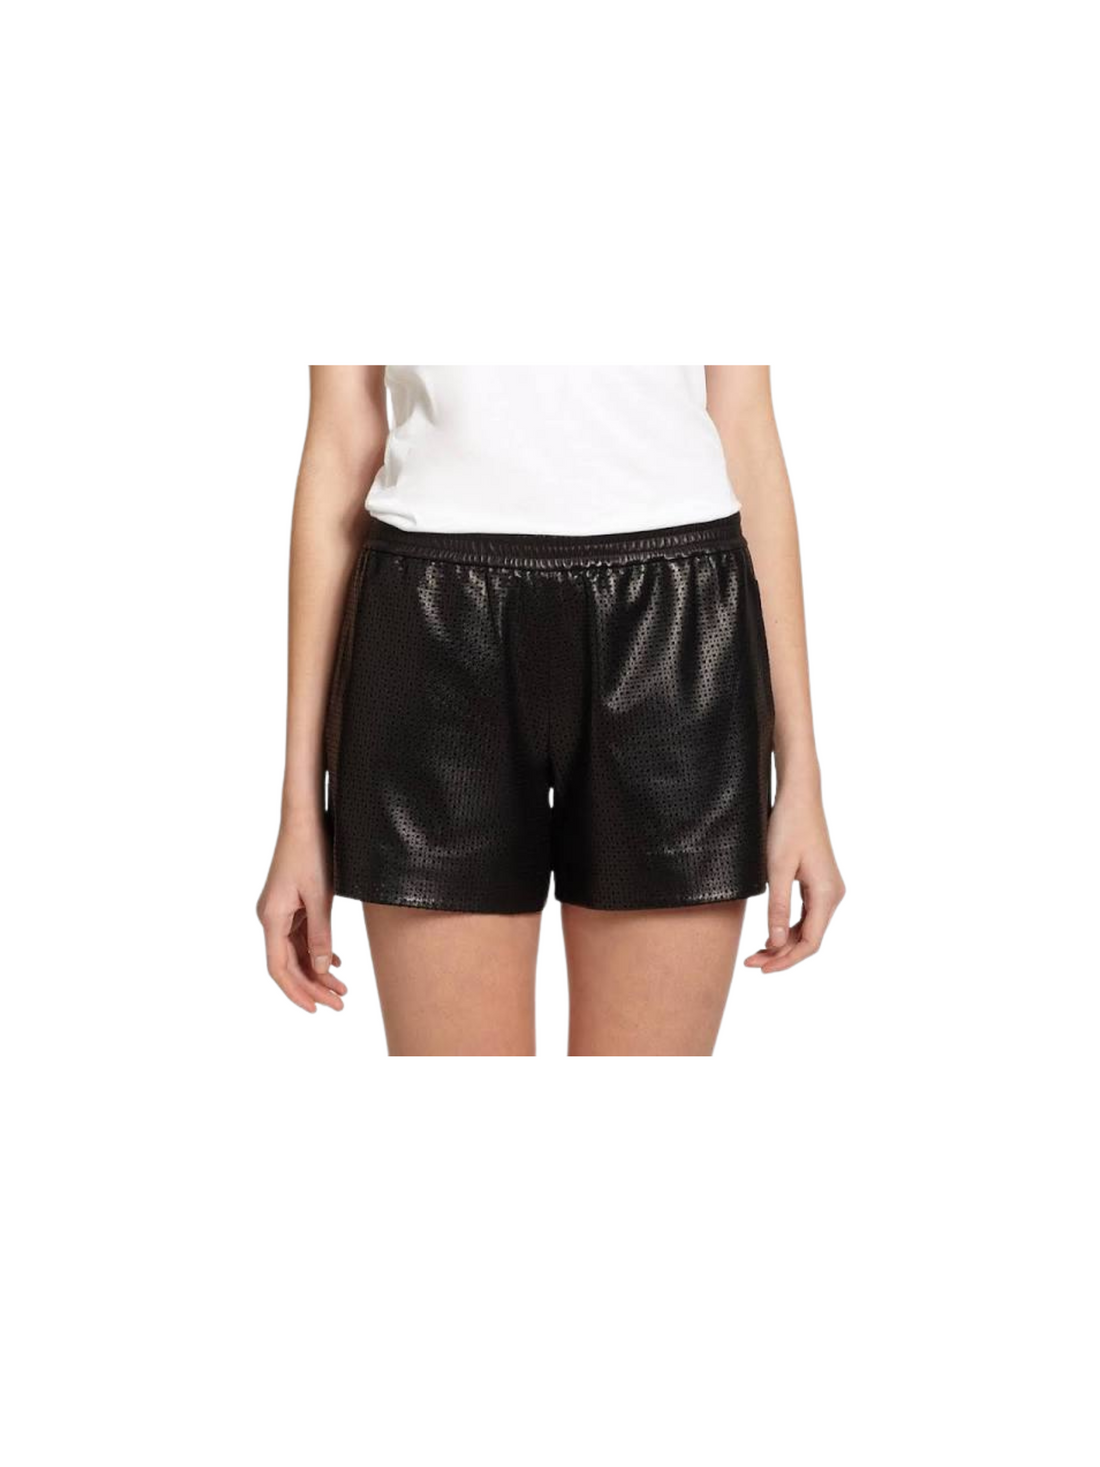 Vince Black Perforated Leather Boxer Shorts